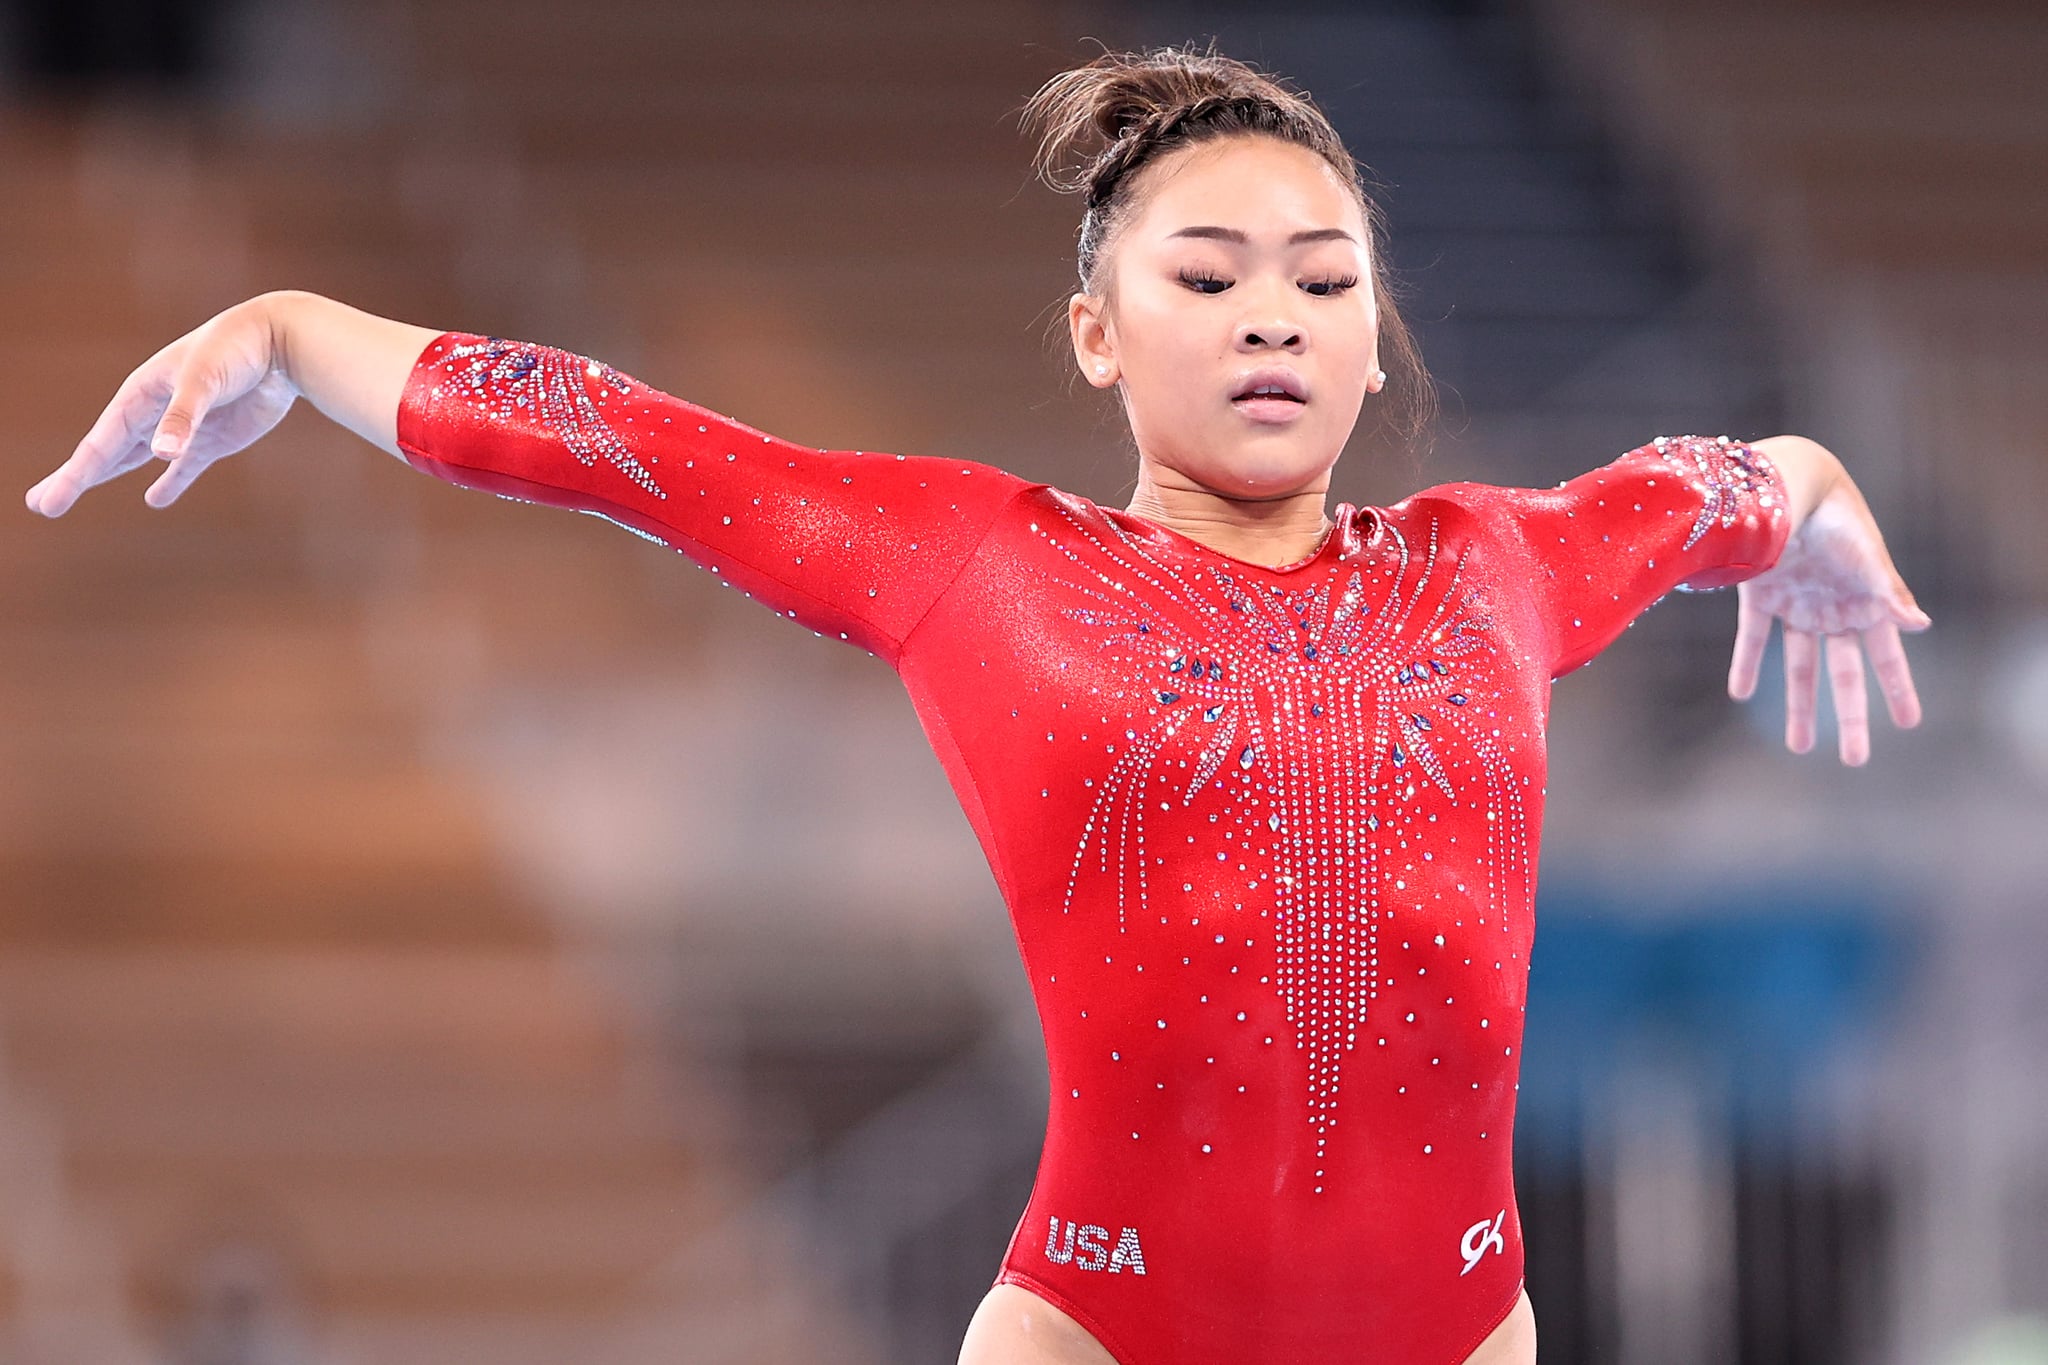 TOKYO, JAPAN - AUGUST 03: Sunisa Lee of Team United States competes during the Women's Balance Beam Final on day eleven of the Tokyo 2020 Olympic Games at Ariake Gymnastics Centre on August 03, 2021 in Tokyo, Japan. (Photo by Elsa/Getty Images)